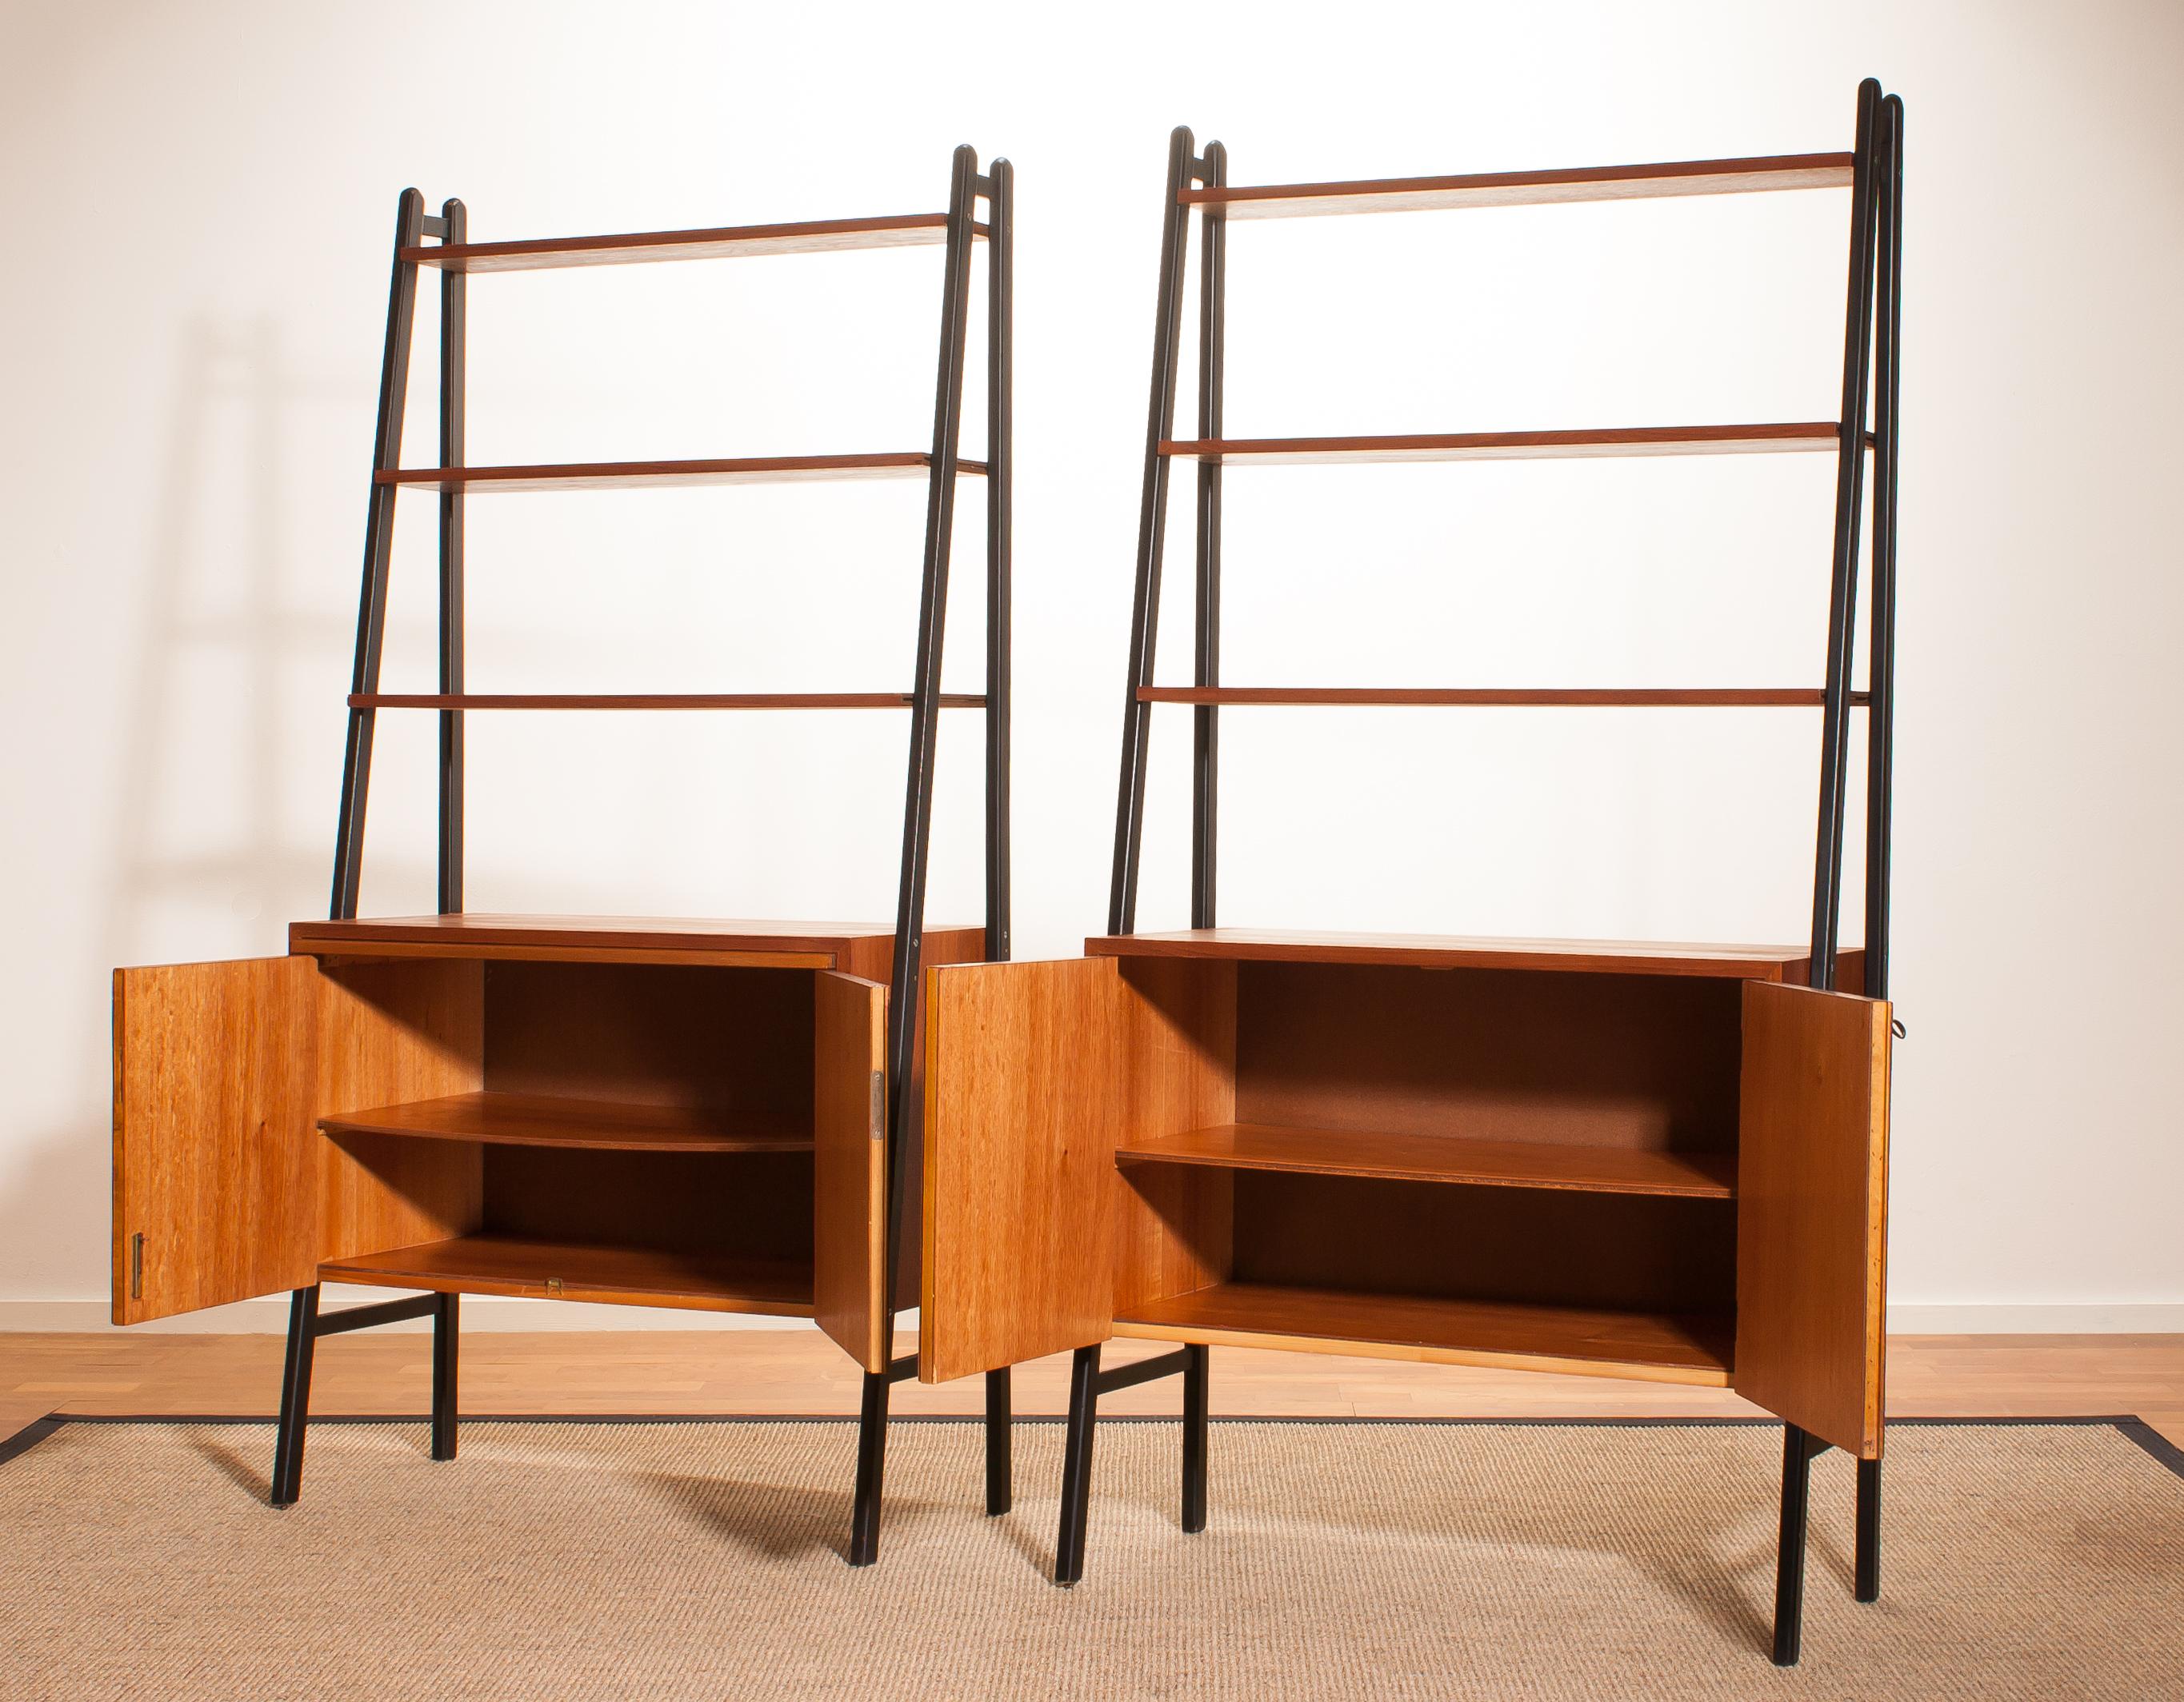 Swedish 1950s, Set of Two Teak Bookcases Room Dividers Cabinets